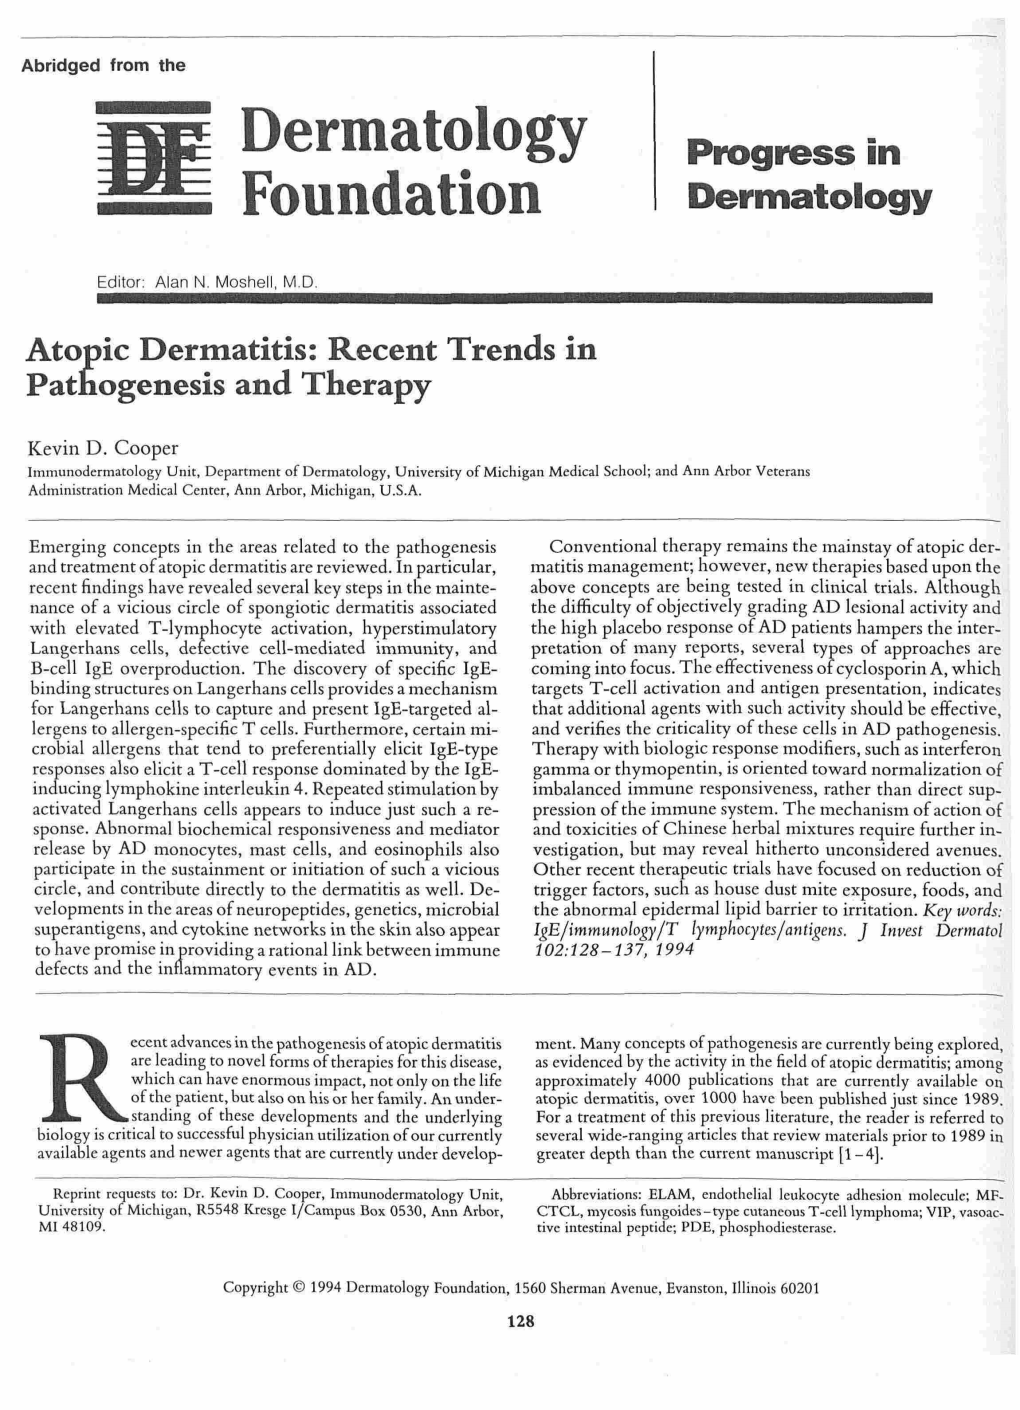 Atopic Dermatitis: Recent Trends in Pathogenesis and Therapy